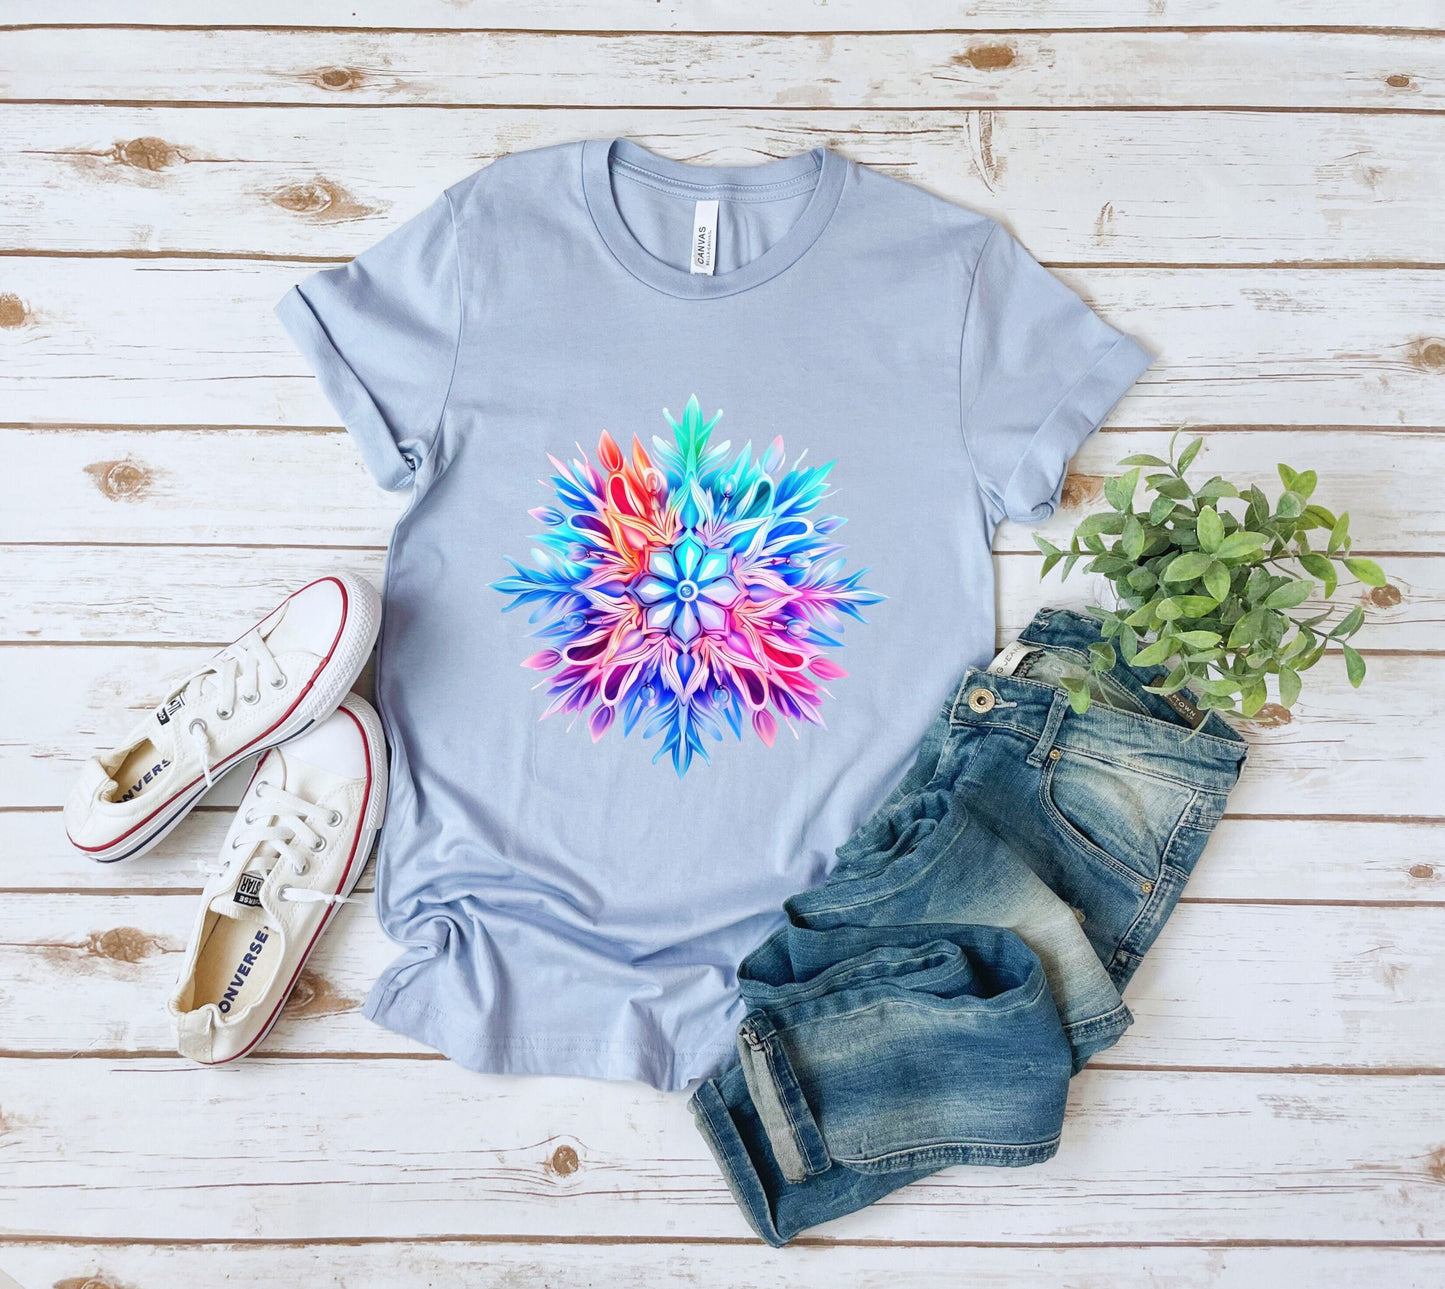 Snow Flake Christmas T-Shirt, Perfect Holiday Cheer Tee, Gift Shirt for Christmas Spirit, Cute Xmas Shirt for Family and friends